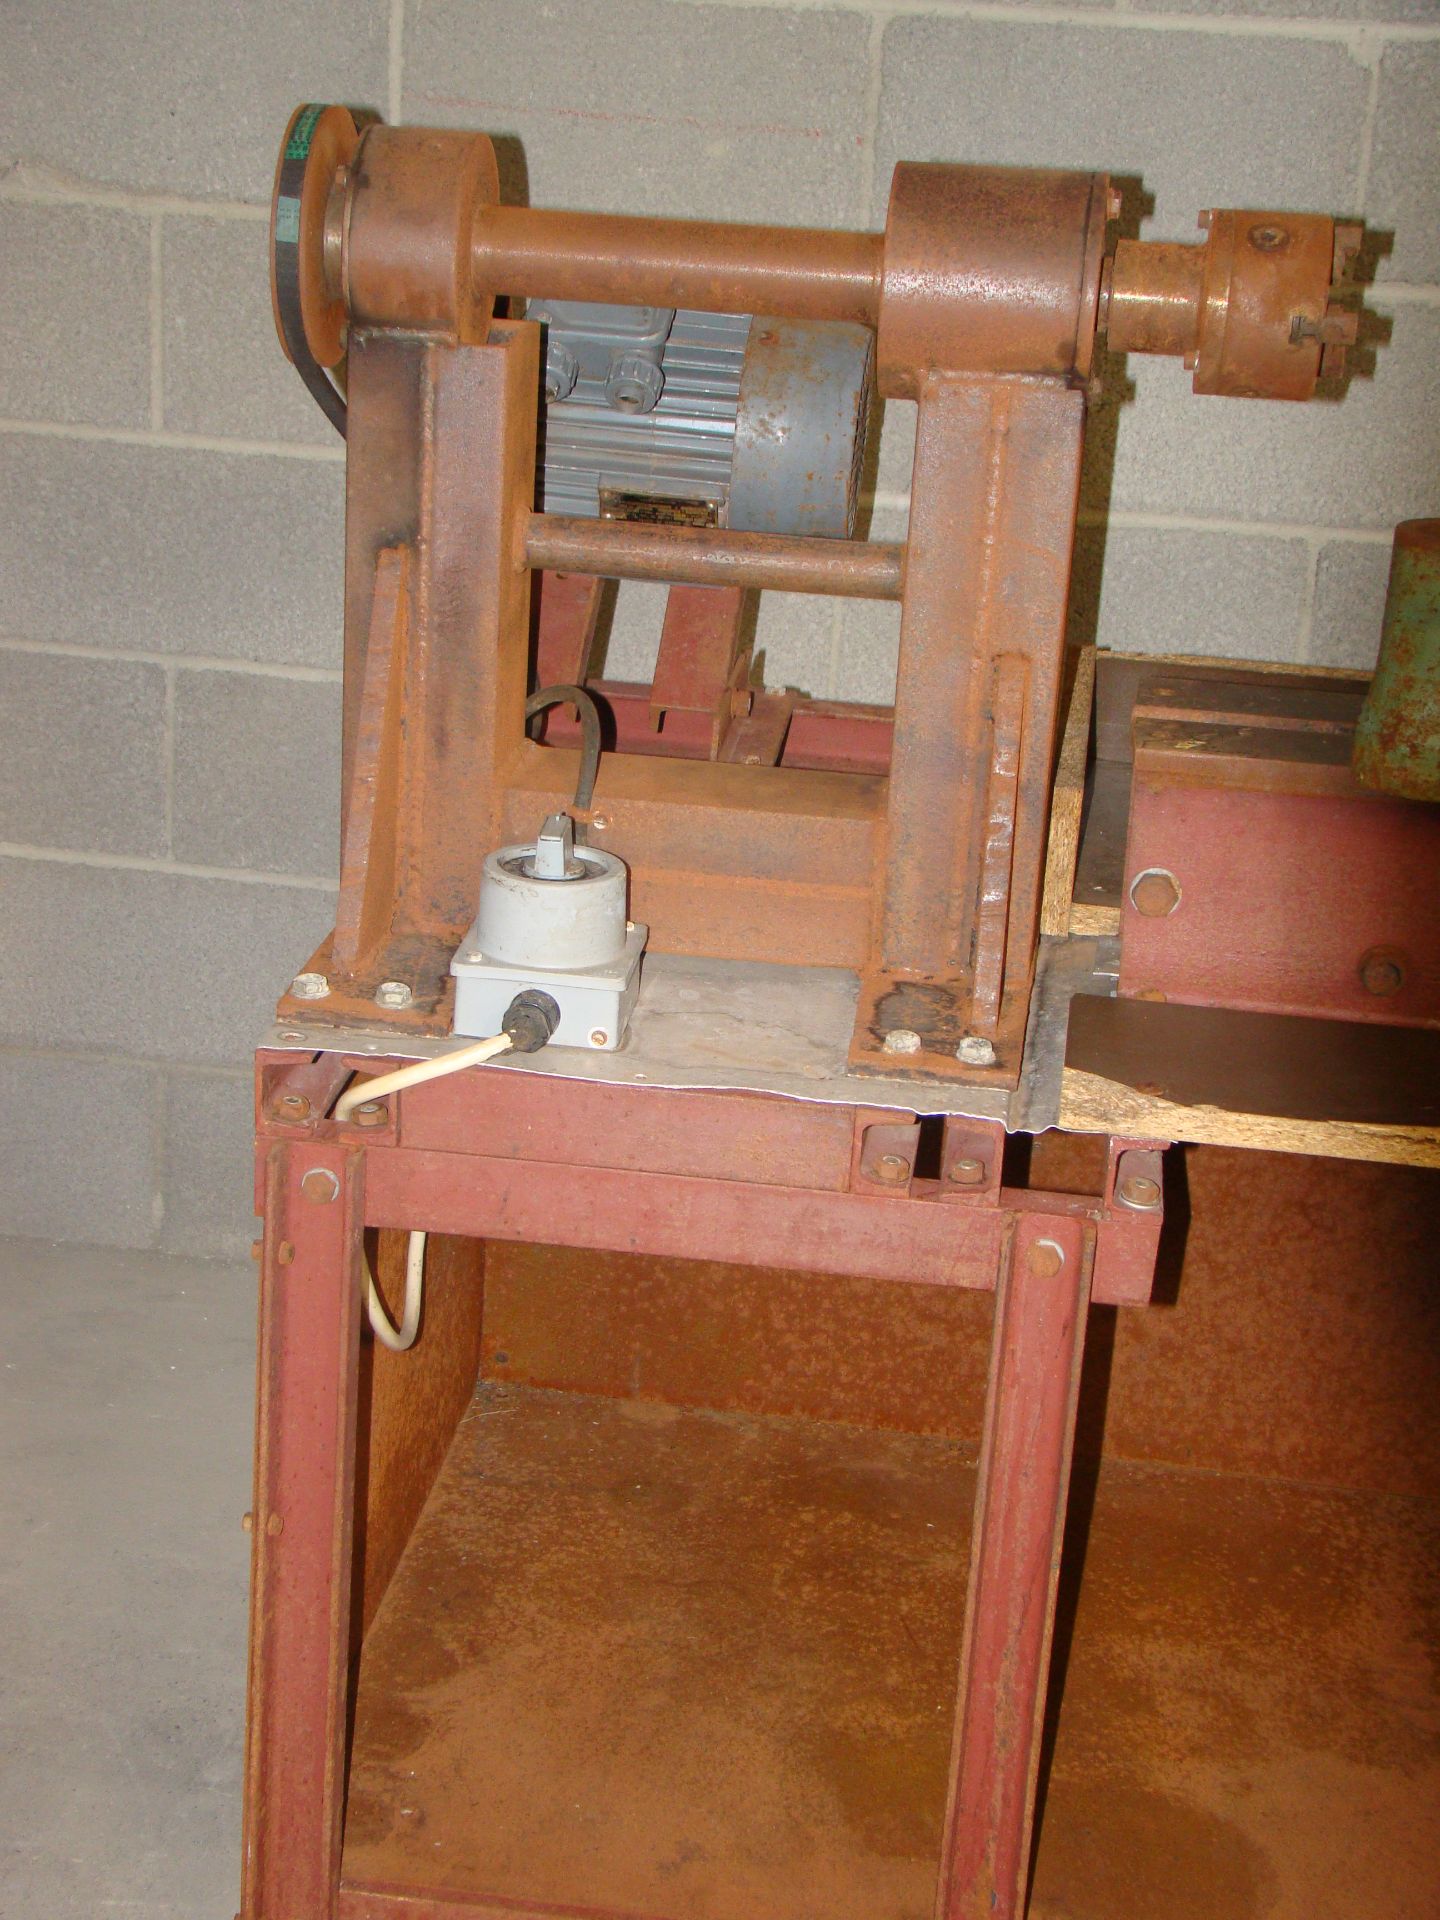 Heavy Duty 18" Wood Lathe on Stand - Image 2 of 9